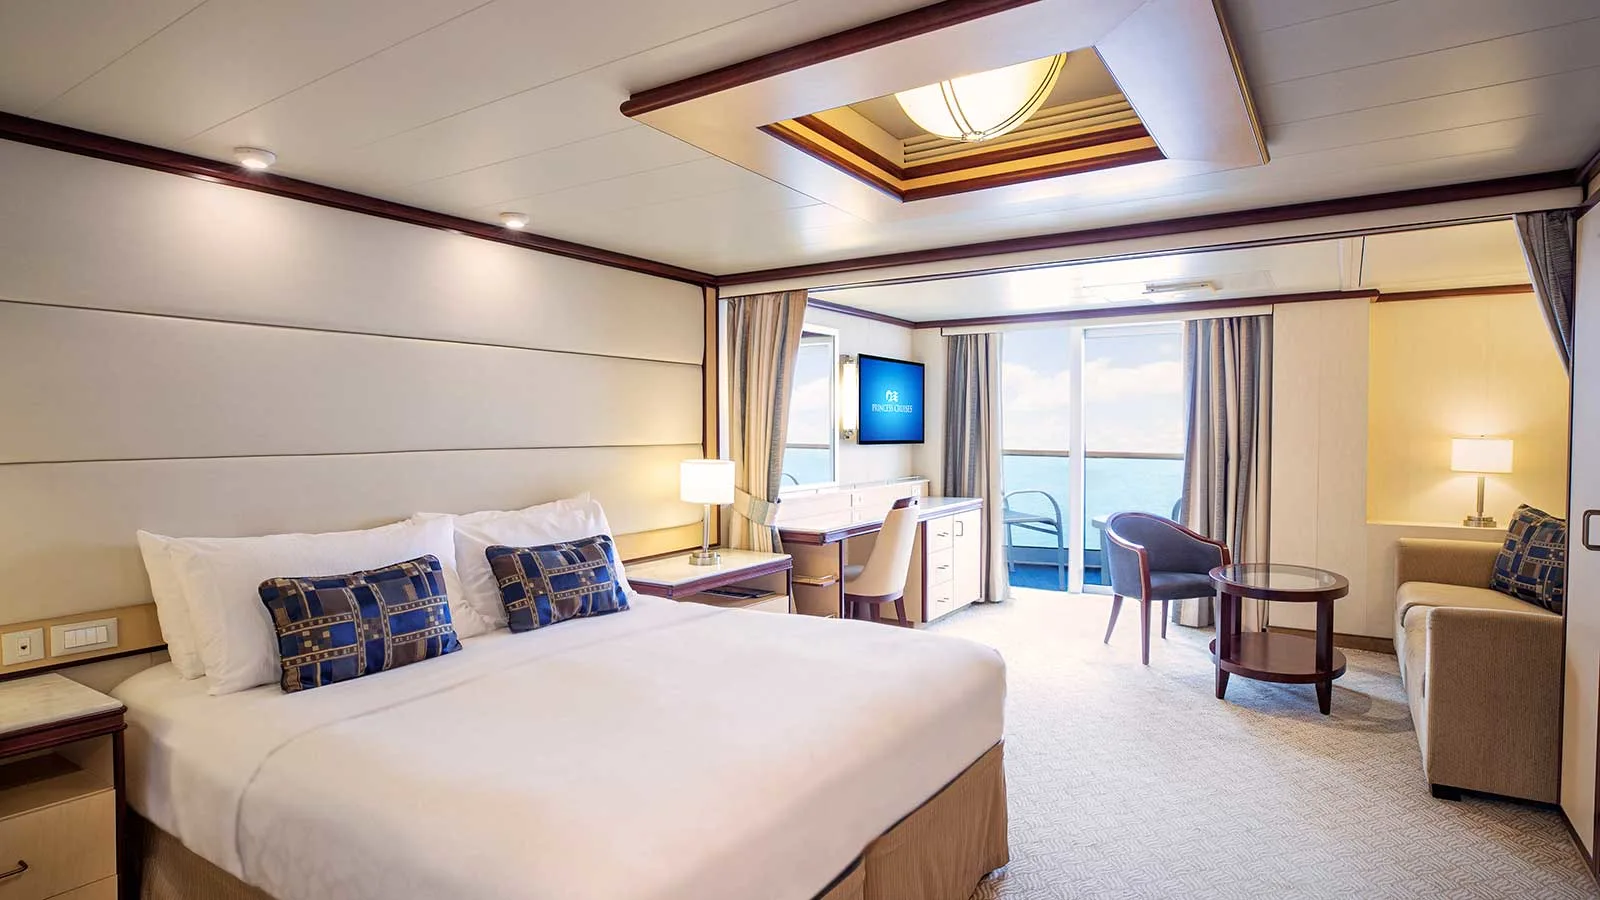 Image of Accessible Accommodation, sourced from: Princess Cruise Lines https://touristwire.com/wp-content/uploads/2023/06/royal-class-wheelchair-accessible-1600.jpg